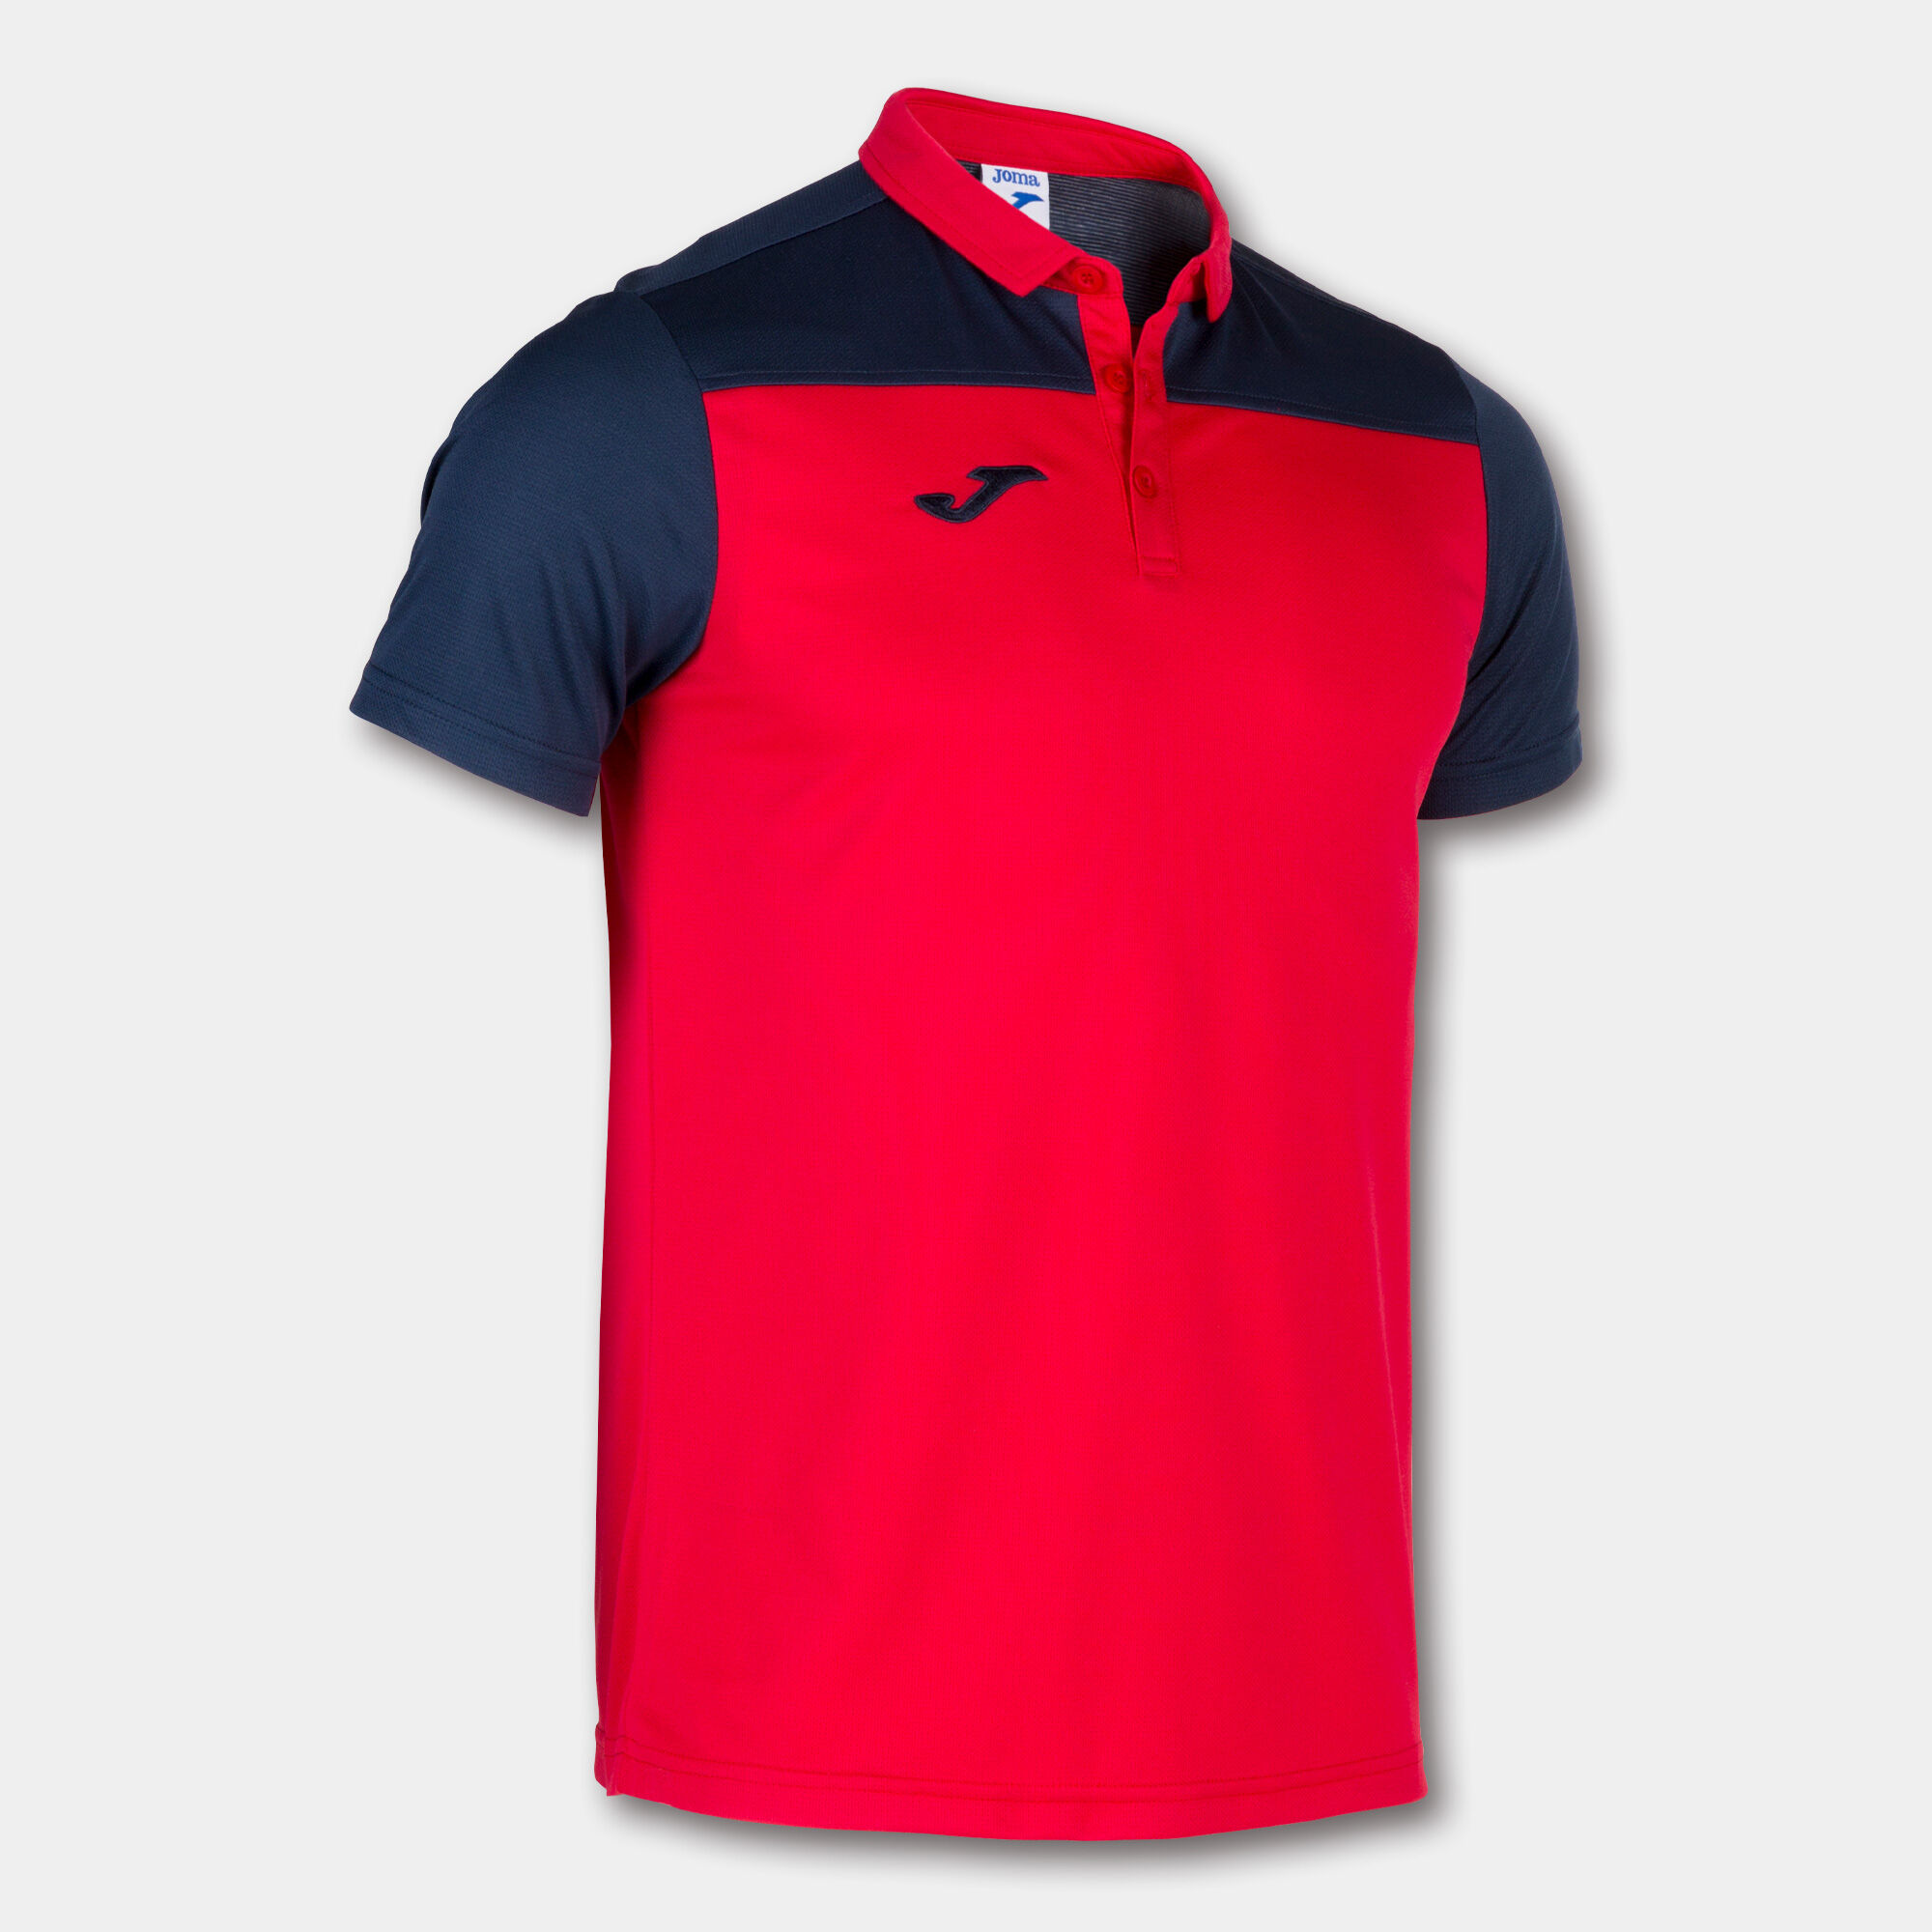 POLO MANCHES COURTES HOMME HOBBY II ROUGE BLEU MARINE